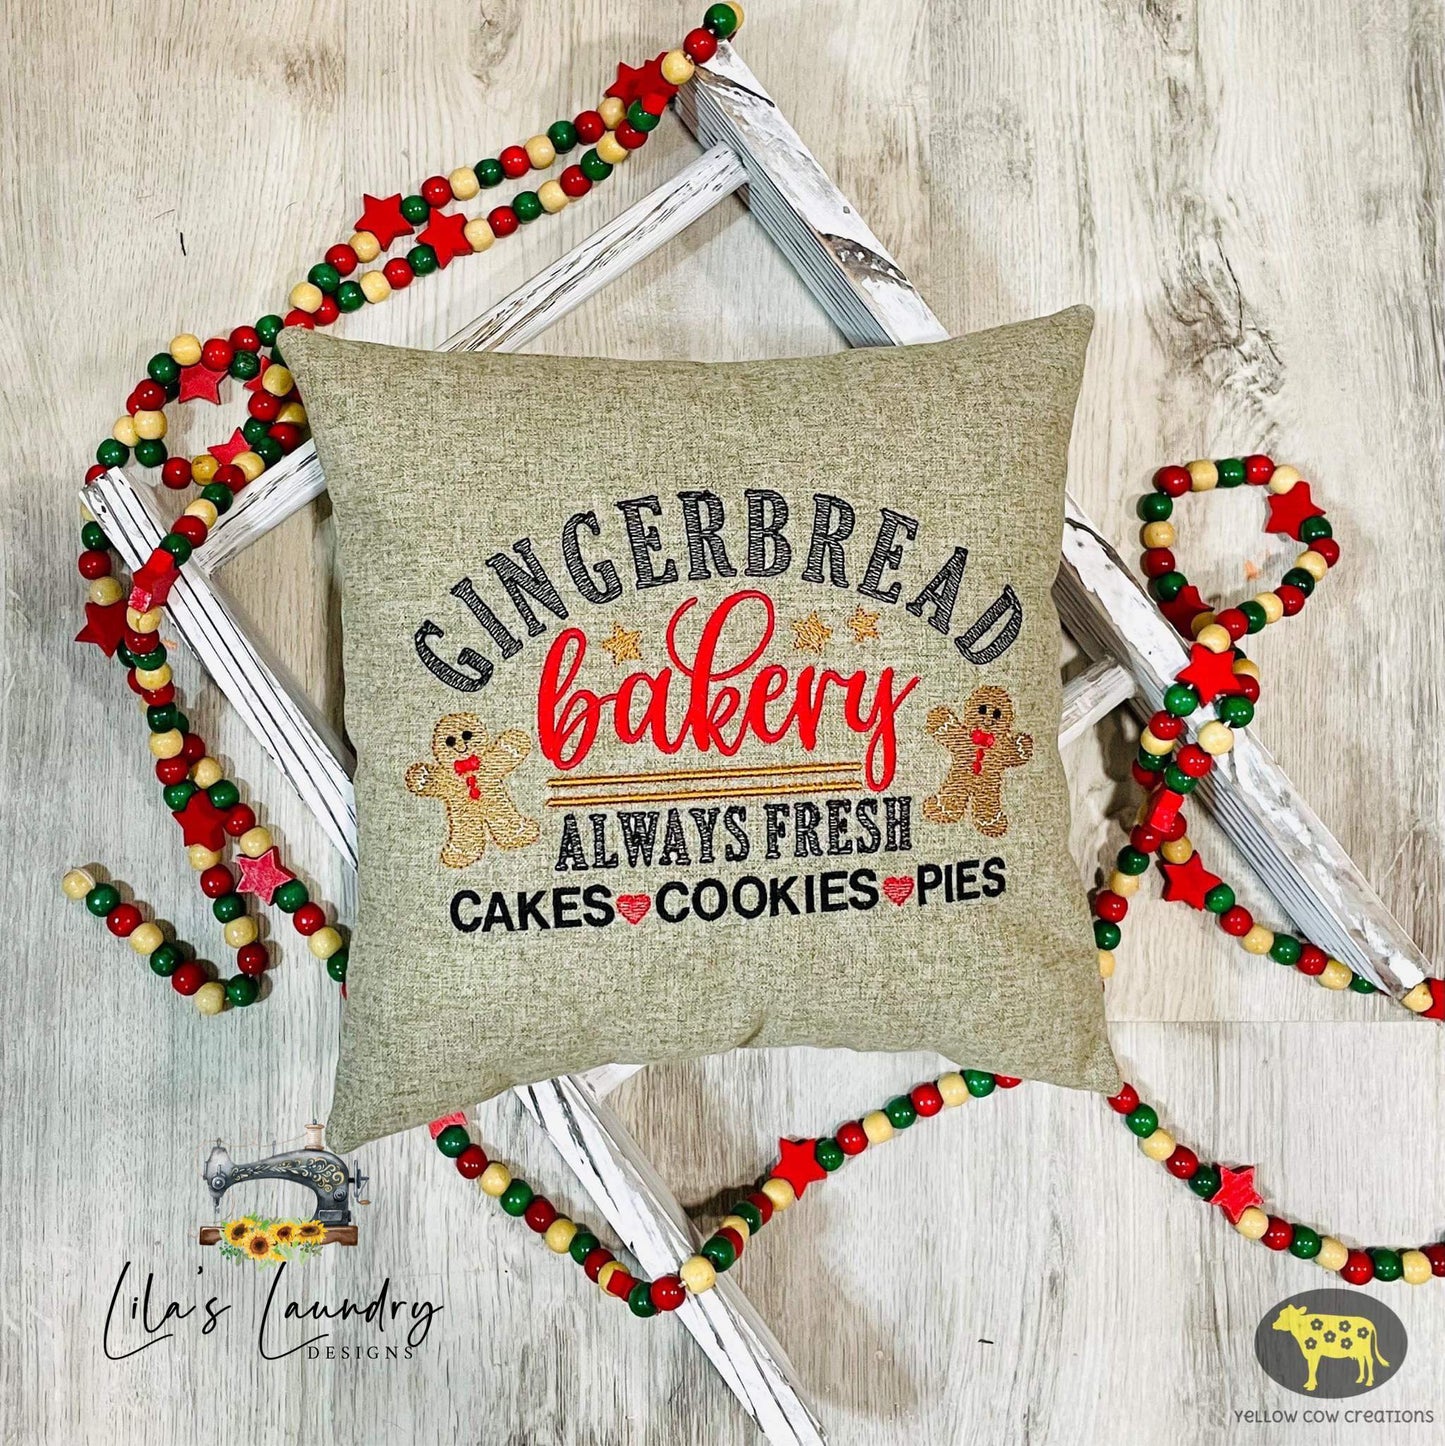 Gingerbread Bakery - 2 sizes- Digital Embroidery Design